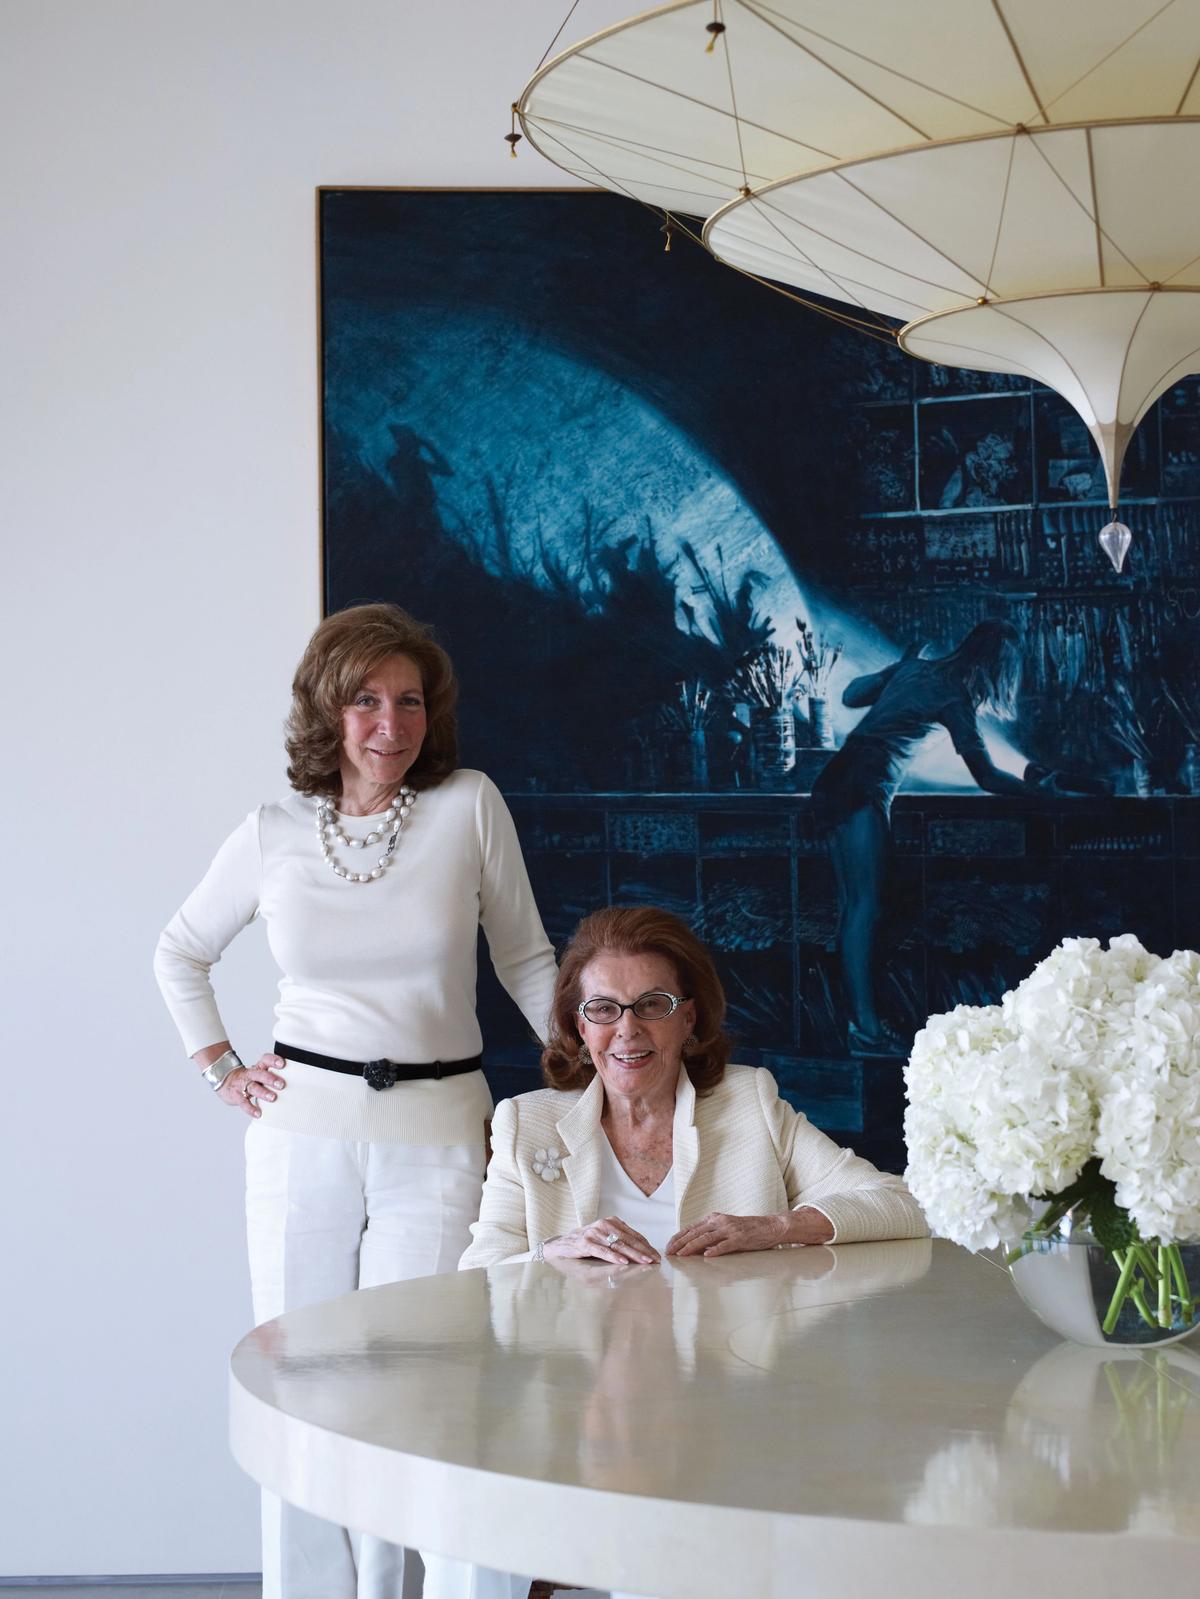 Emily Fisher Landau (seated), with her daughter Candia Fisher, in front of Mark Tansey’s The Bricoleur’s Daughter © Ngoc Minh Ngo